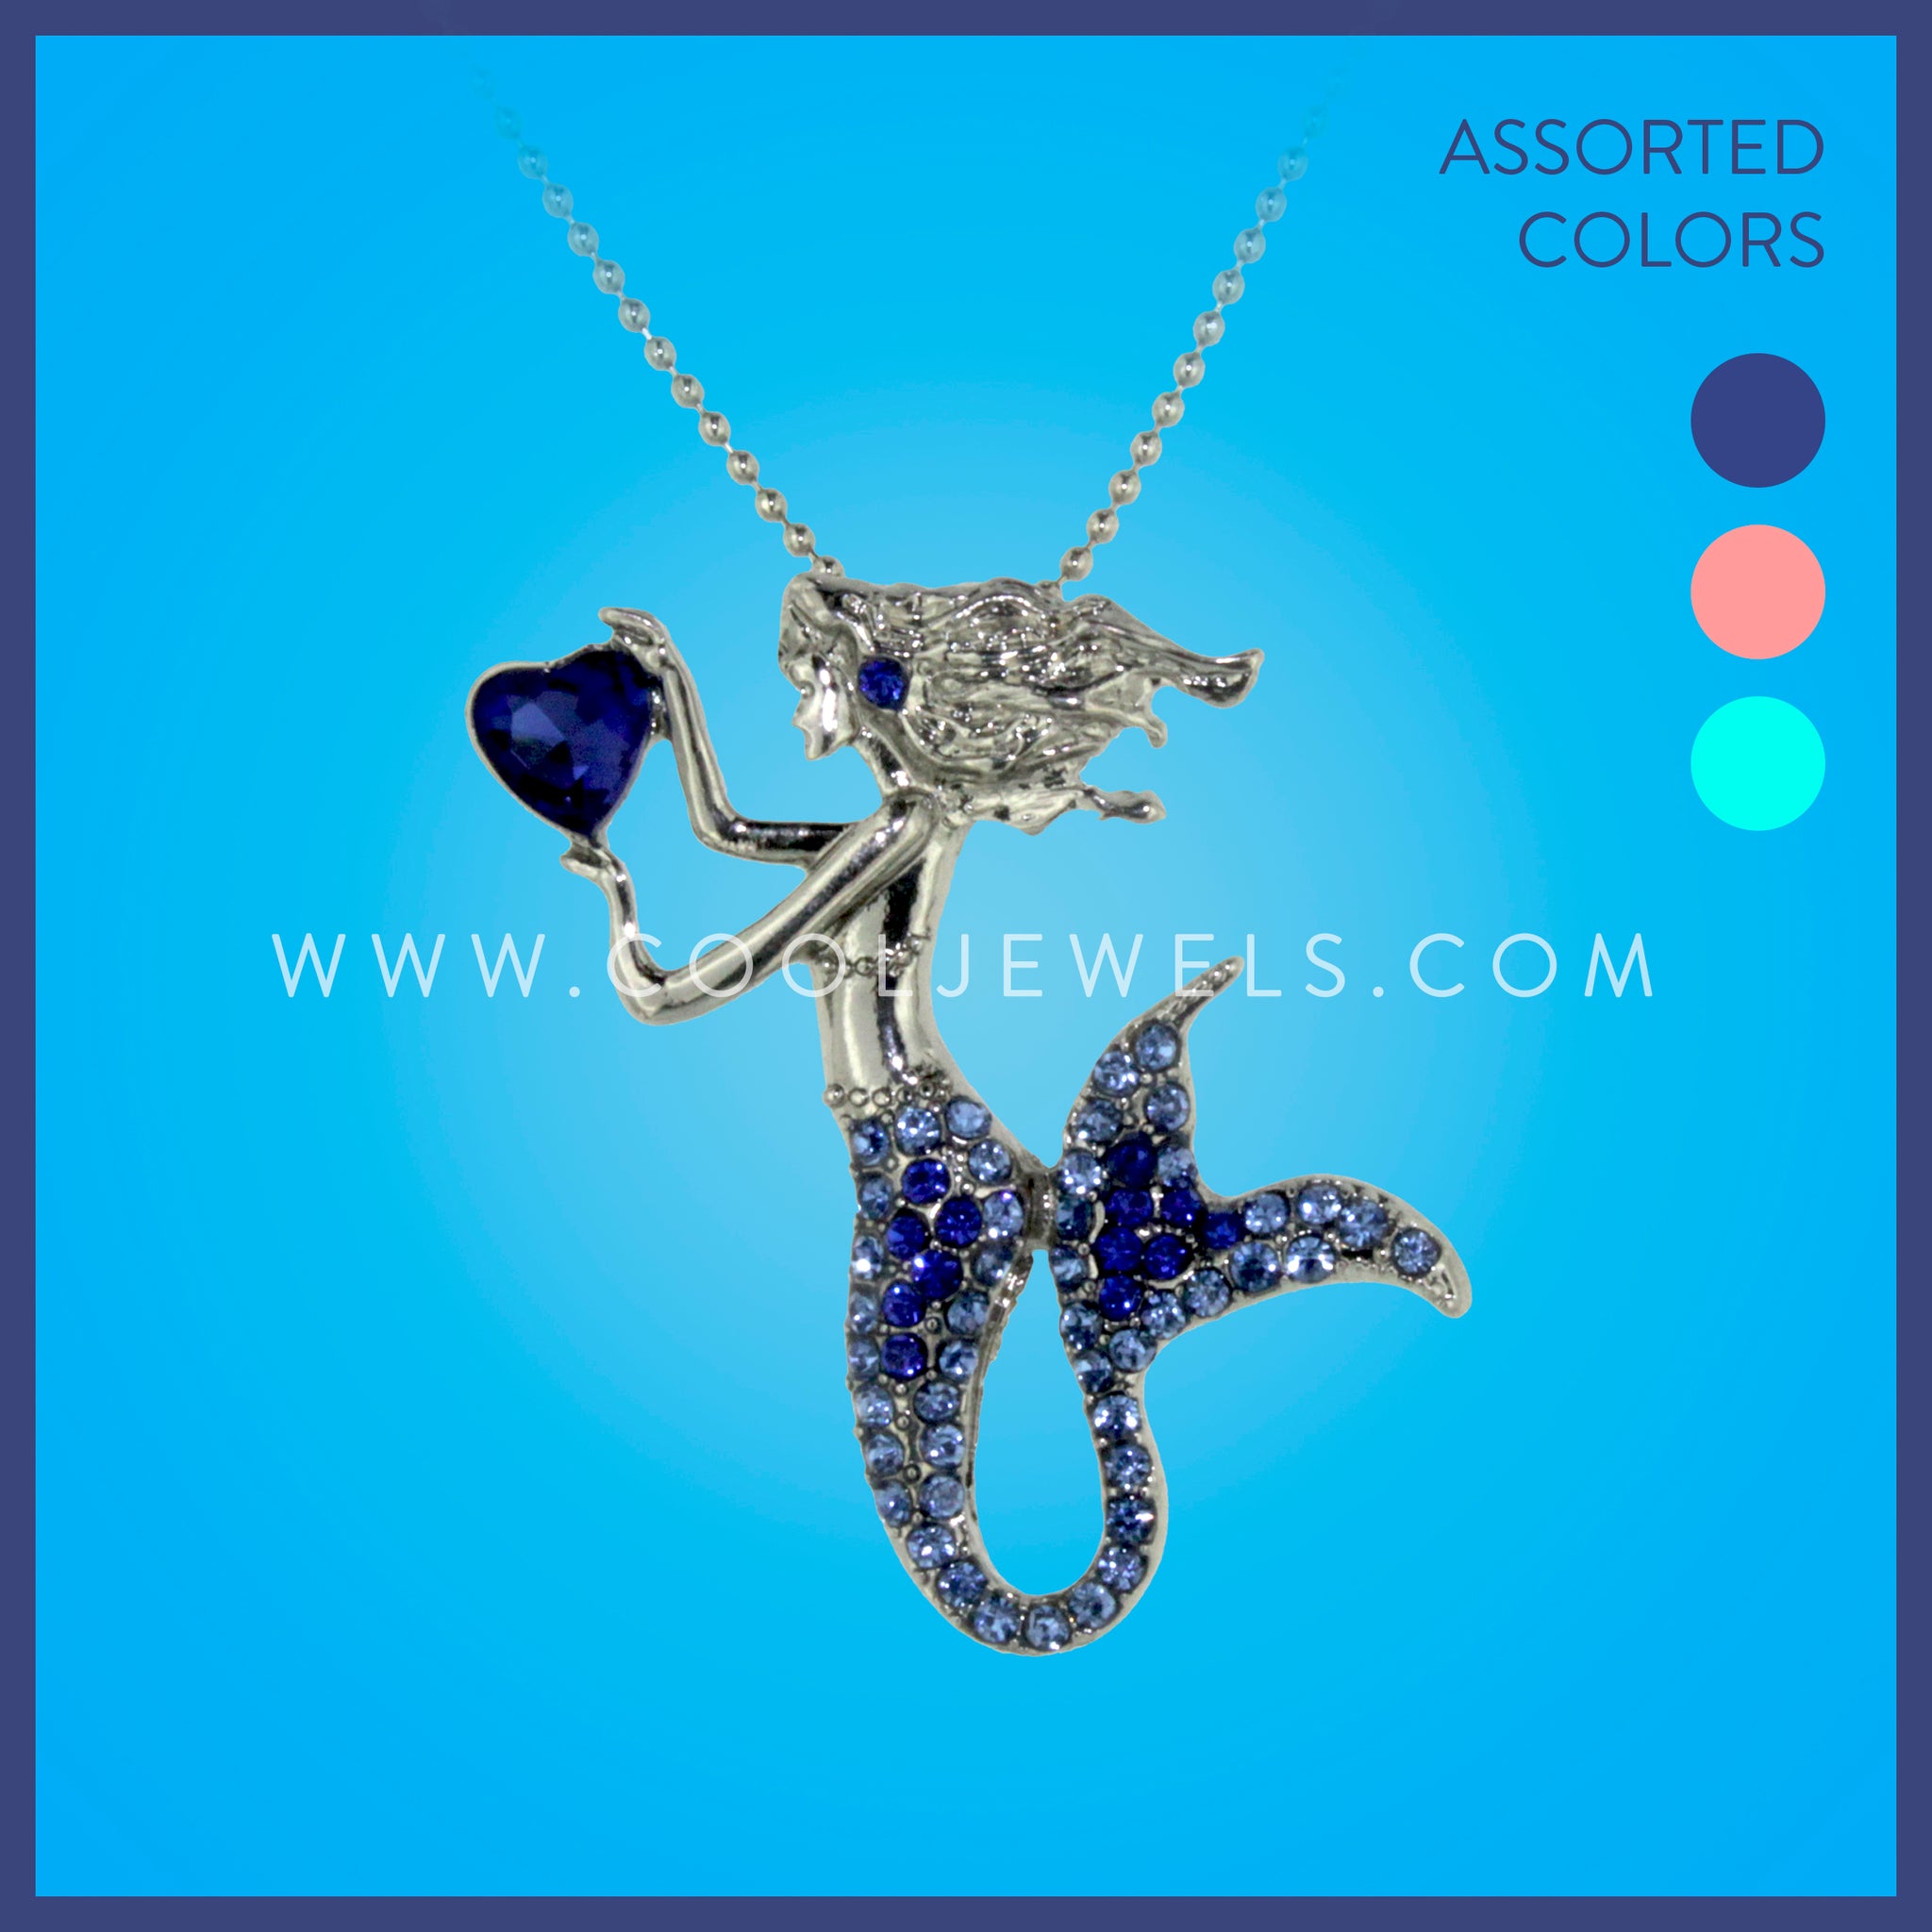 NECKLACE WITH CRYSTAL HEART AND RHINESTONE MERMAID